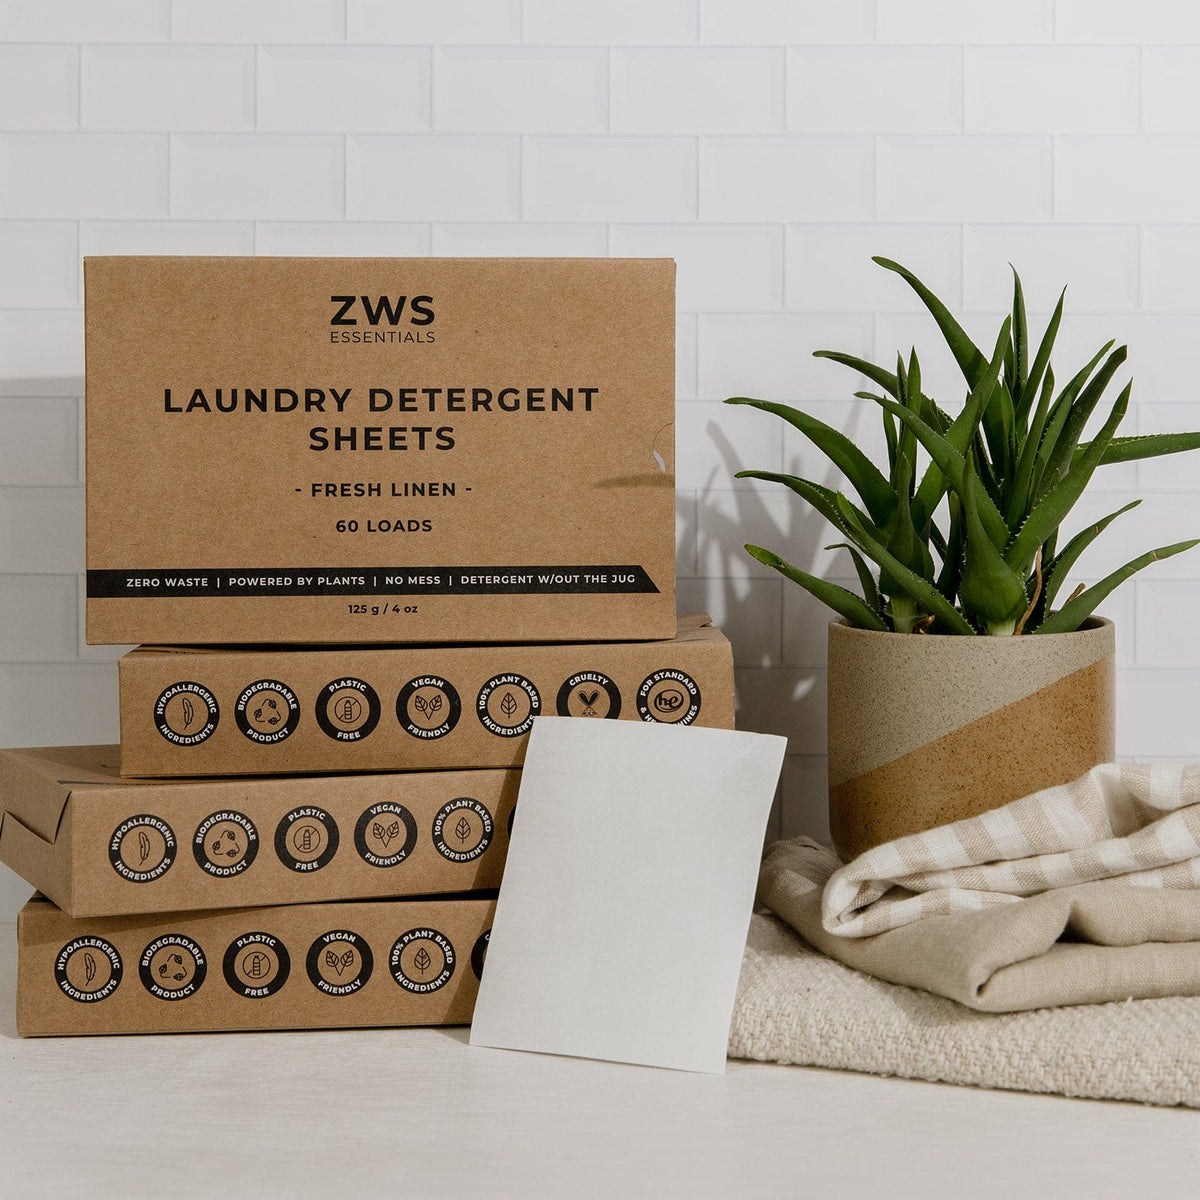 https://cdn.shopify.com/s/files/1/0617/2878/4620/products/zws-essentials-4-boxes-fresh-linen-laundry-detergent-mini-kit-2-or-4-boxes-31666165252207_1200x.jpg?v=1694801522